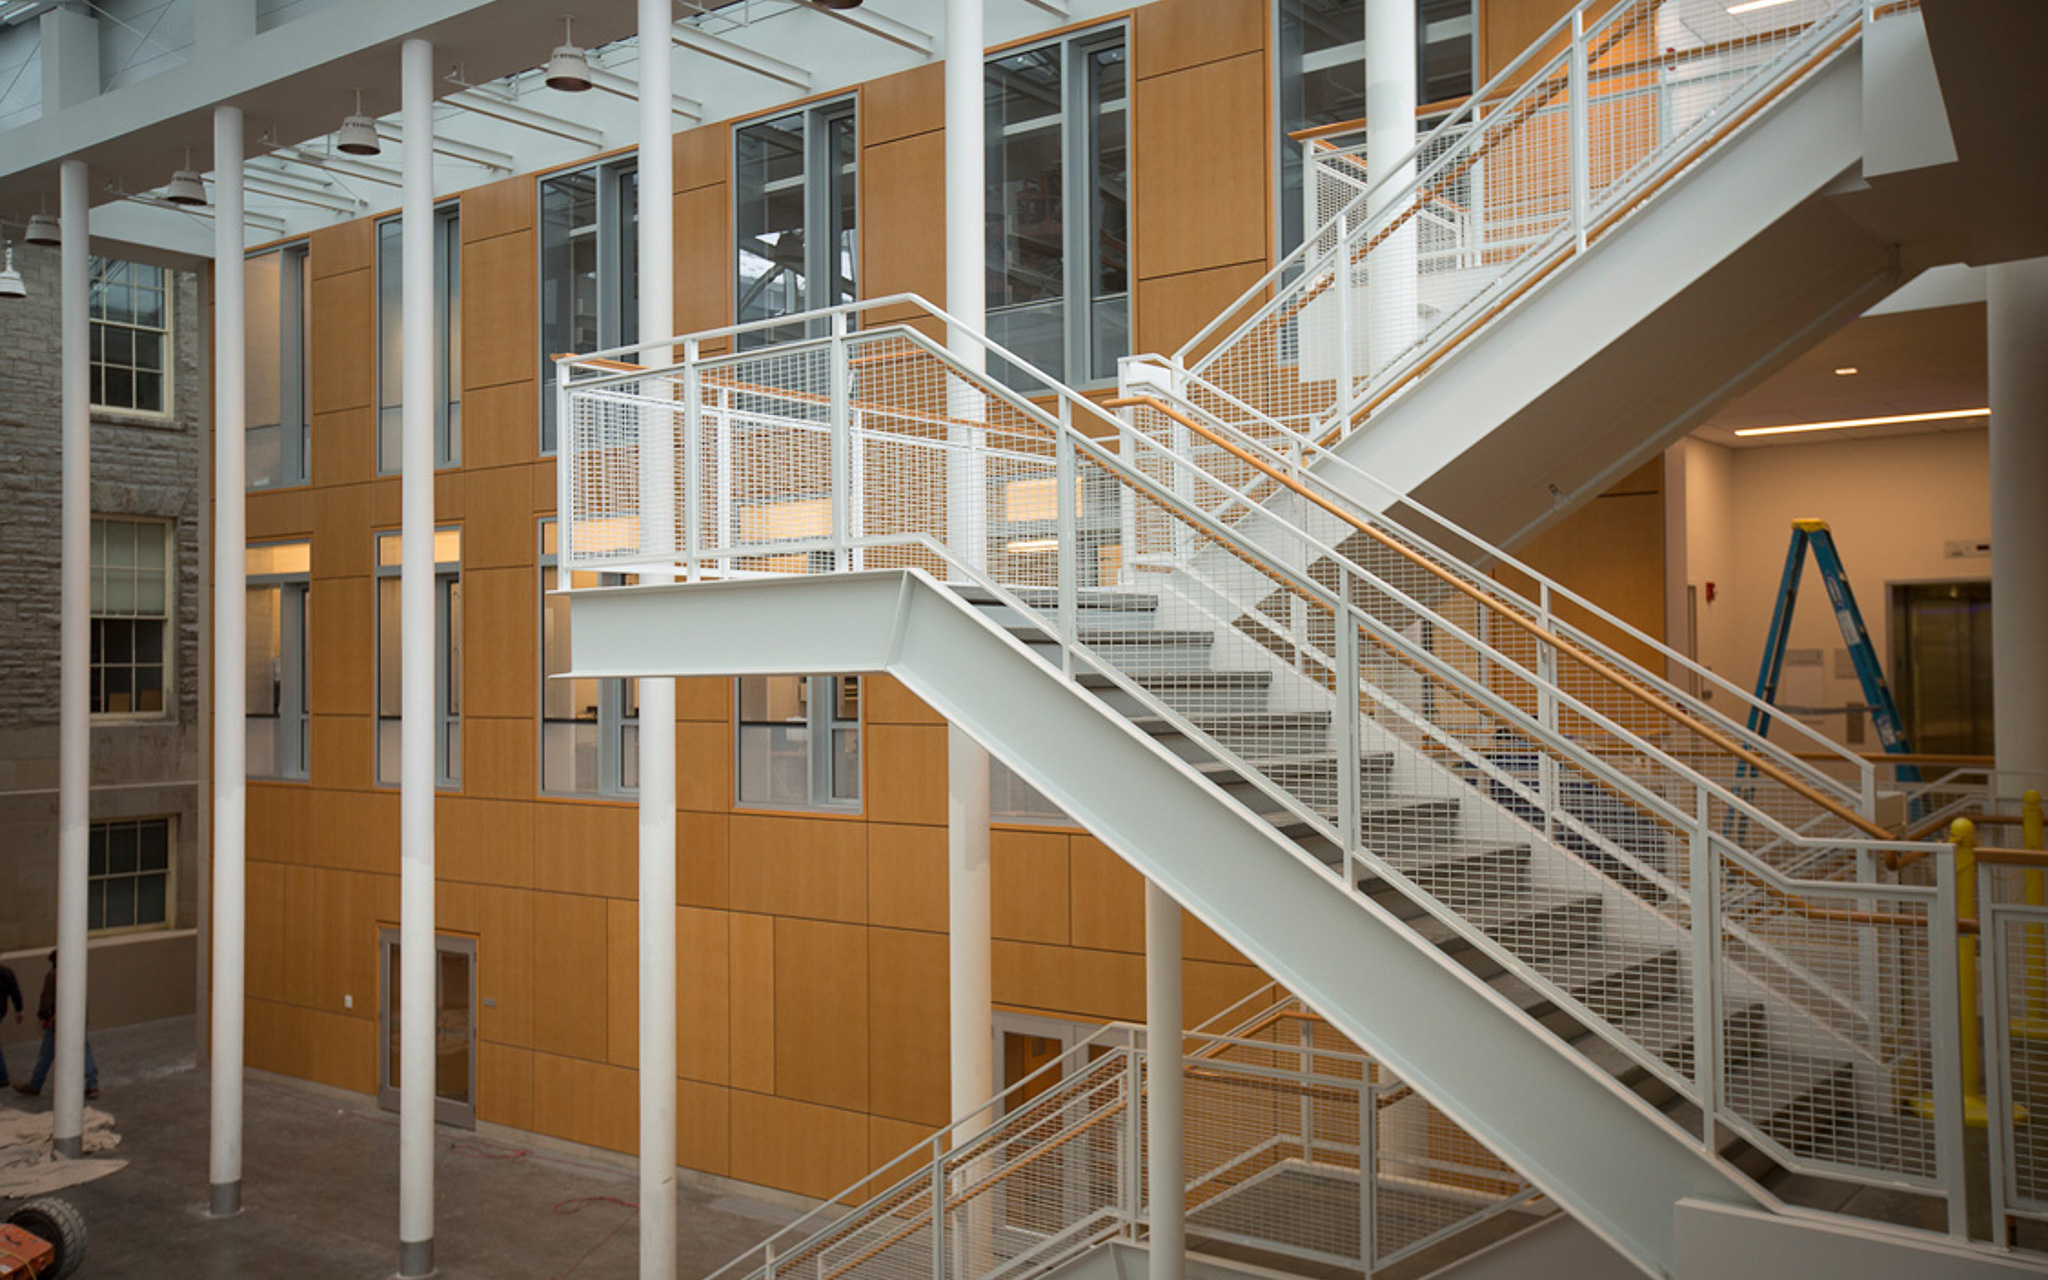 Stairwell located in Klarman Hall